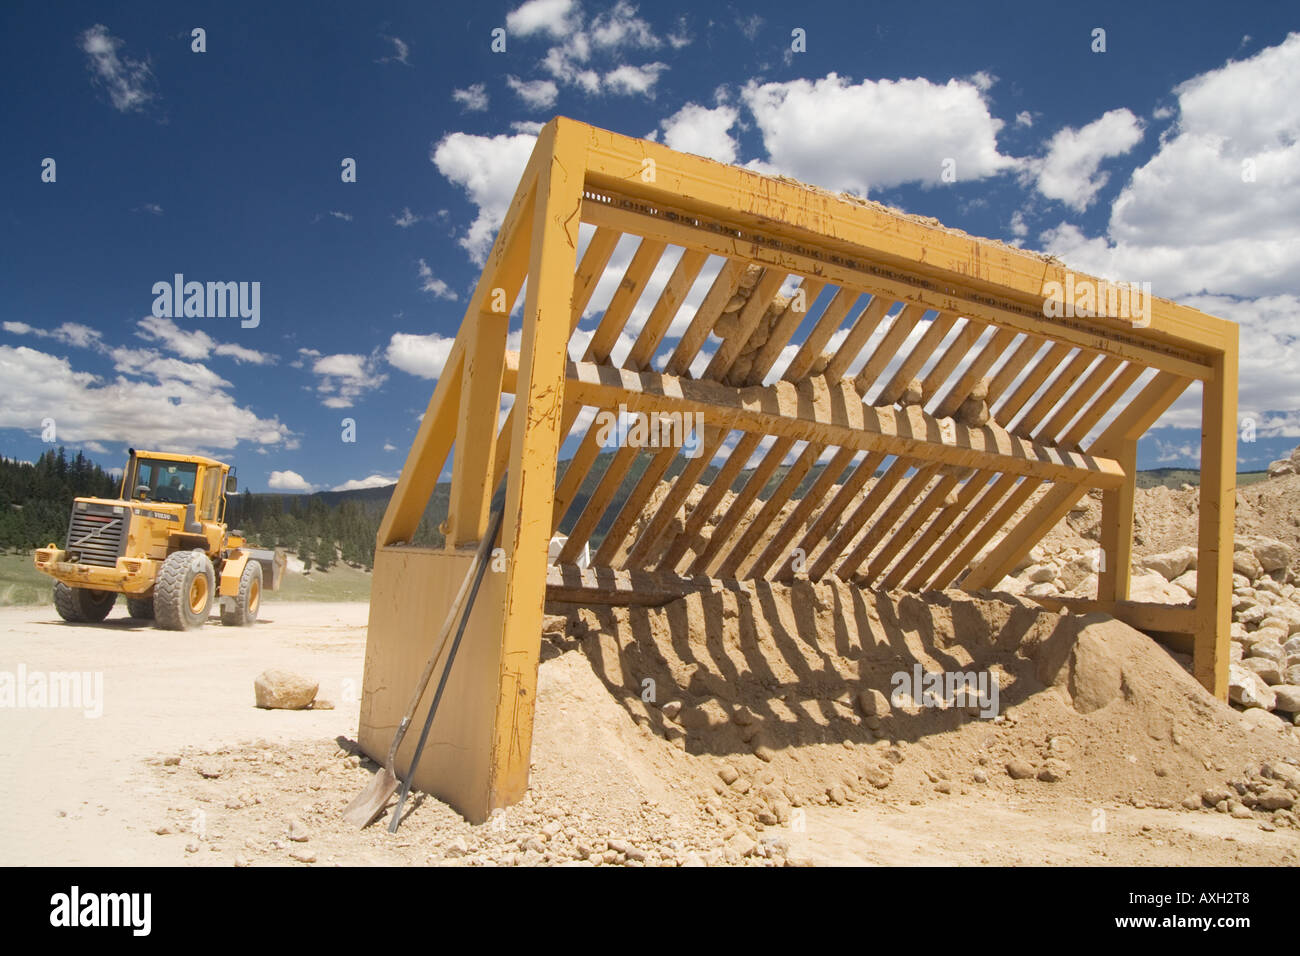 Road construction site in the Valles Caldera National Preserve, New Mexico. Stock Photo